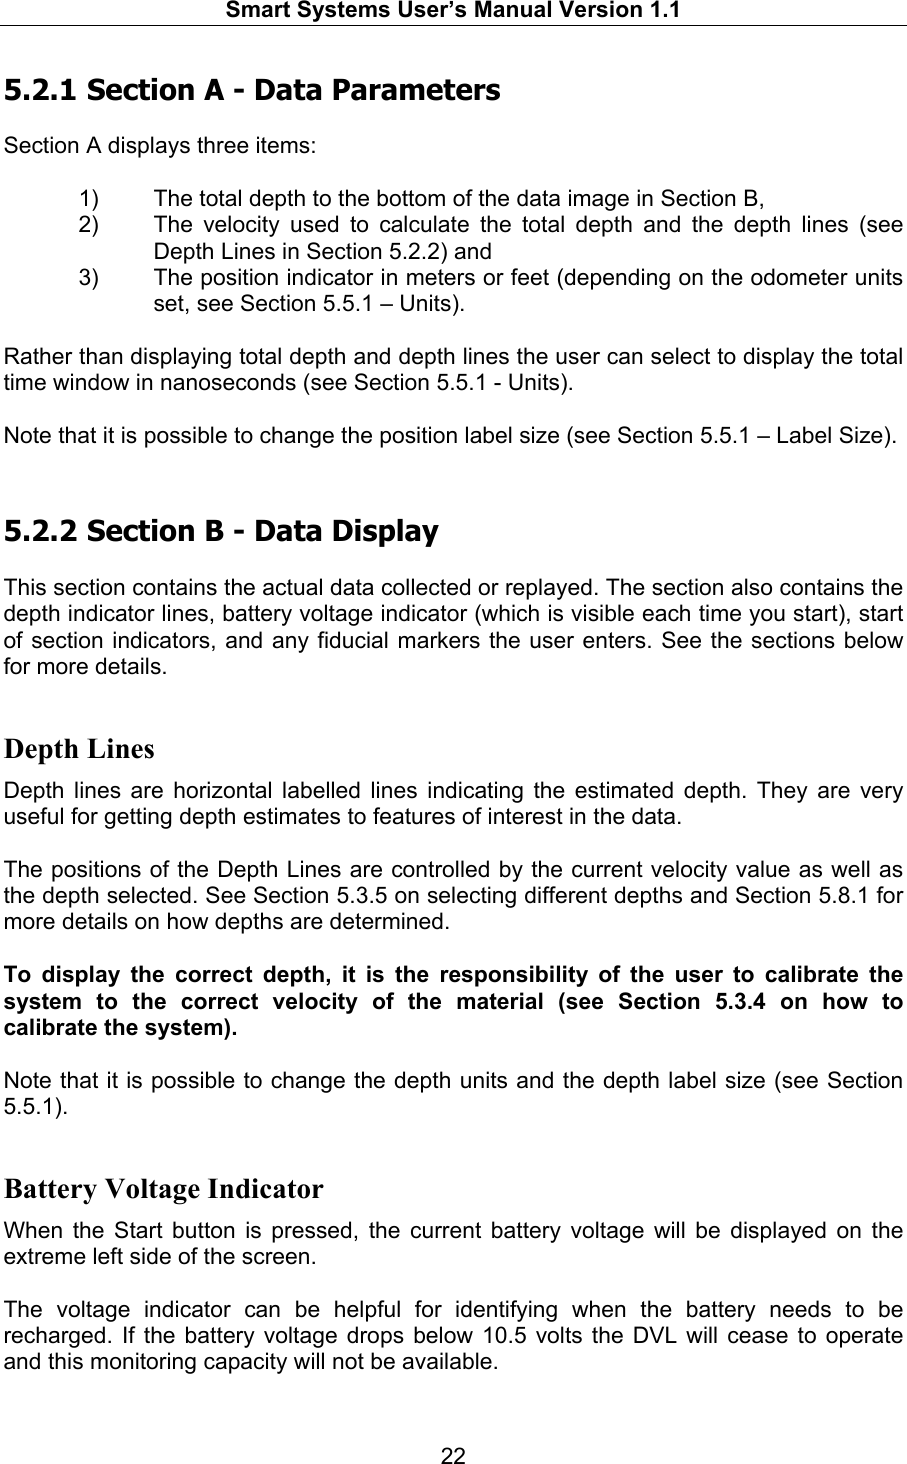   Smart Systems User’s Manual Version 1.1  22  5.2.1  Section A - Data Parameters  Section A displays three items:  1)  The total depth to the bottom of the data image in Section B,  2)  The velocity used to calculate the total depth and the depth lines (see Depth Lines in Section 5.2.2) and  3)  The position indicator in meters or feet (depending on the odometer units set, see Section 5.5.1 – Units).   Rather than displaying total depth and depth lines the user can select to display the total time window in nanoseconds (see Section 5.5.1 - Units).  Note that it is possible to change the position label size (see Section 5.5.1 – Label Size).  5.2.2  Section B - Data Display  This section contains the actual data collected or replayed. The section also contains the depth indicator lines, battery voltage indicator (which is visible each time you start), start of section indicators, and any fiducial markers the user enters. See the sections below for more details.  Depth Lines Depth lines are horizontal labelled lines indicating the estimated depth. They are very useful for getting depth estimates to features of interest in the data.  The positions of the Depth Lines are controlled by the current velocity value as well as the depth selected. See Section 5.3.5 on selecting different depths and Section 5.8.1 for more details on how depths are determined.   To display the correct depth, it is the responsibility of the user to calibrate the system to the correct velocity of the material (see Section 5.3.4 on how to calibrate the system).   Note that it is possible to change the depth units and the depth label size (see Section 5.5.1).  Battery Voltage Indicator When the Start button is pressed, the current battery voltage will be displayed on the extreme left side of the screen.   The voltage indicator can be helpful for identifying when the battery needs to be recharged. If the battery voltage drops below 10.5 volts the DVL will cease to operate and this monitoring capacity will not be available.   